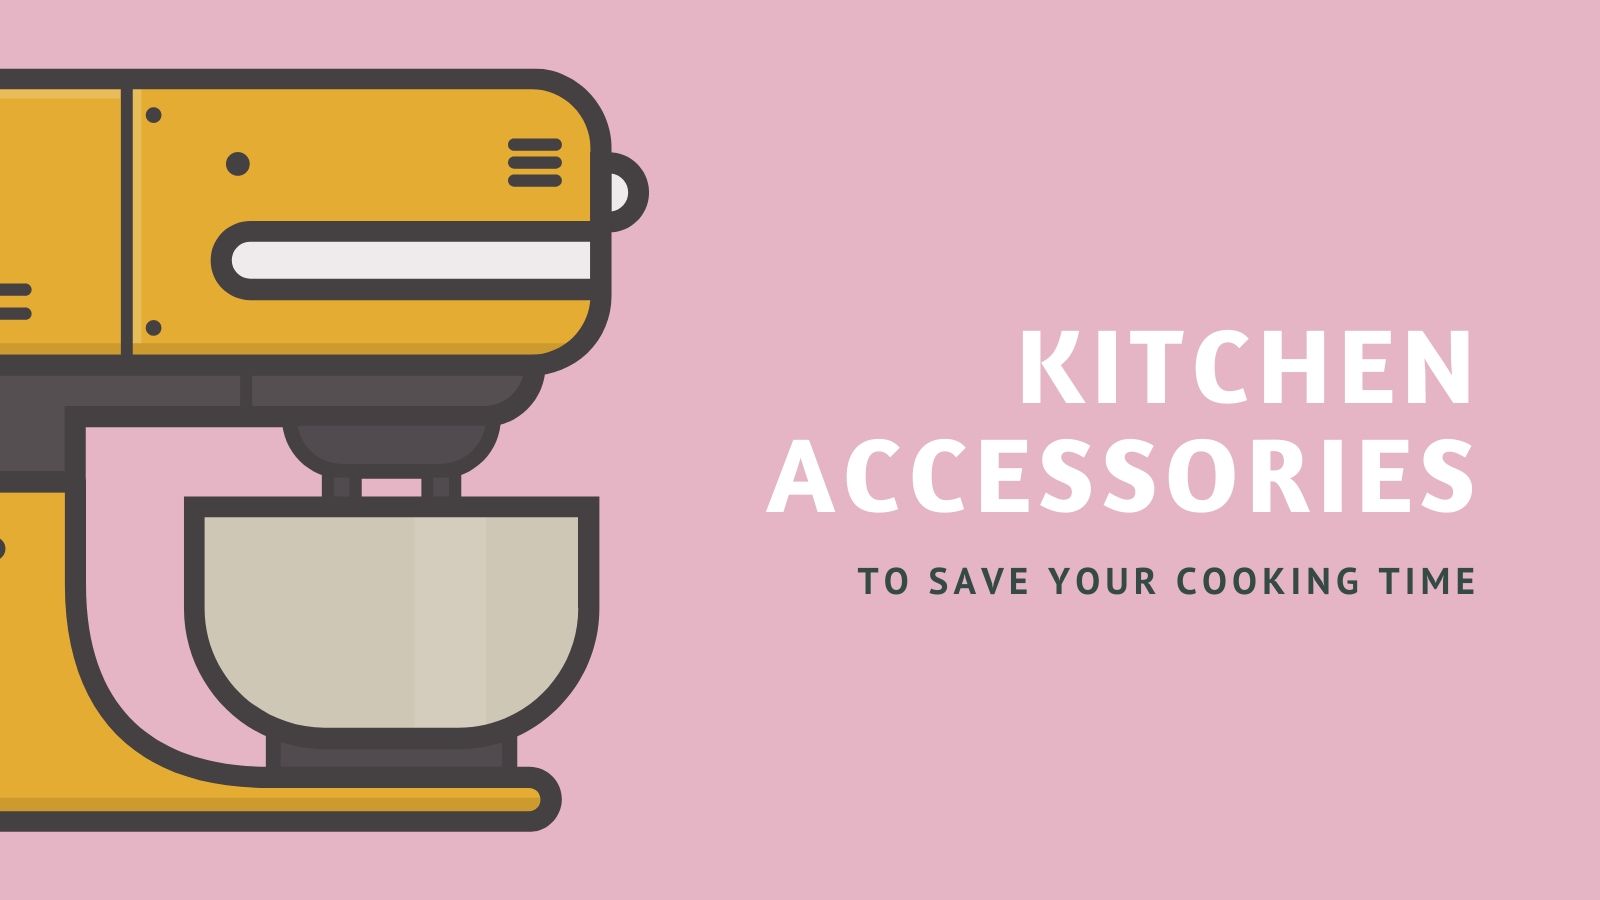 Top 10 must have kitchen accessories to help you cook great food